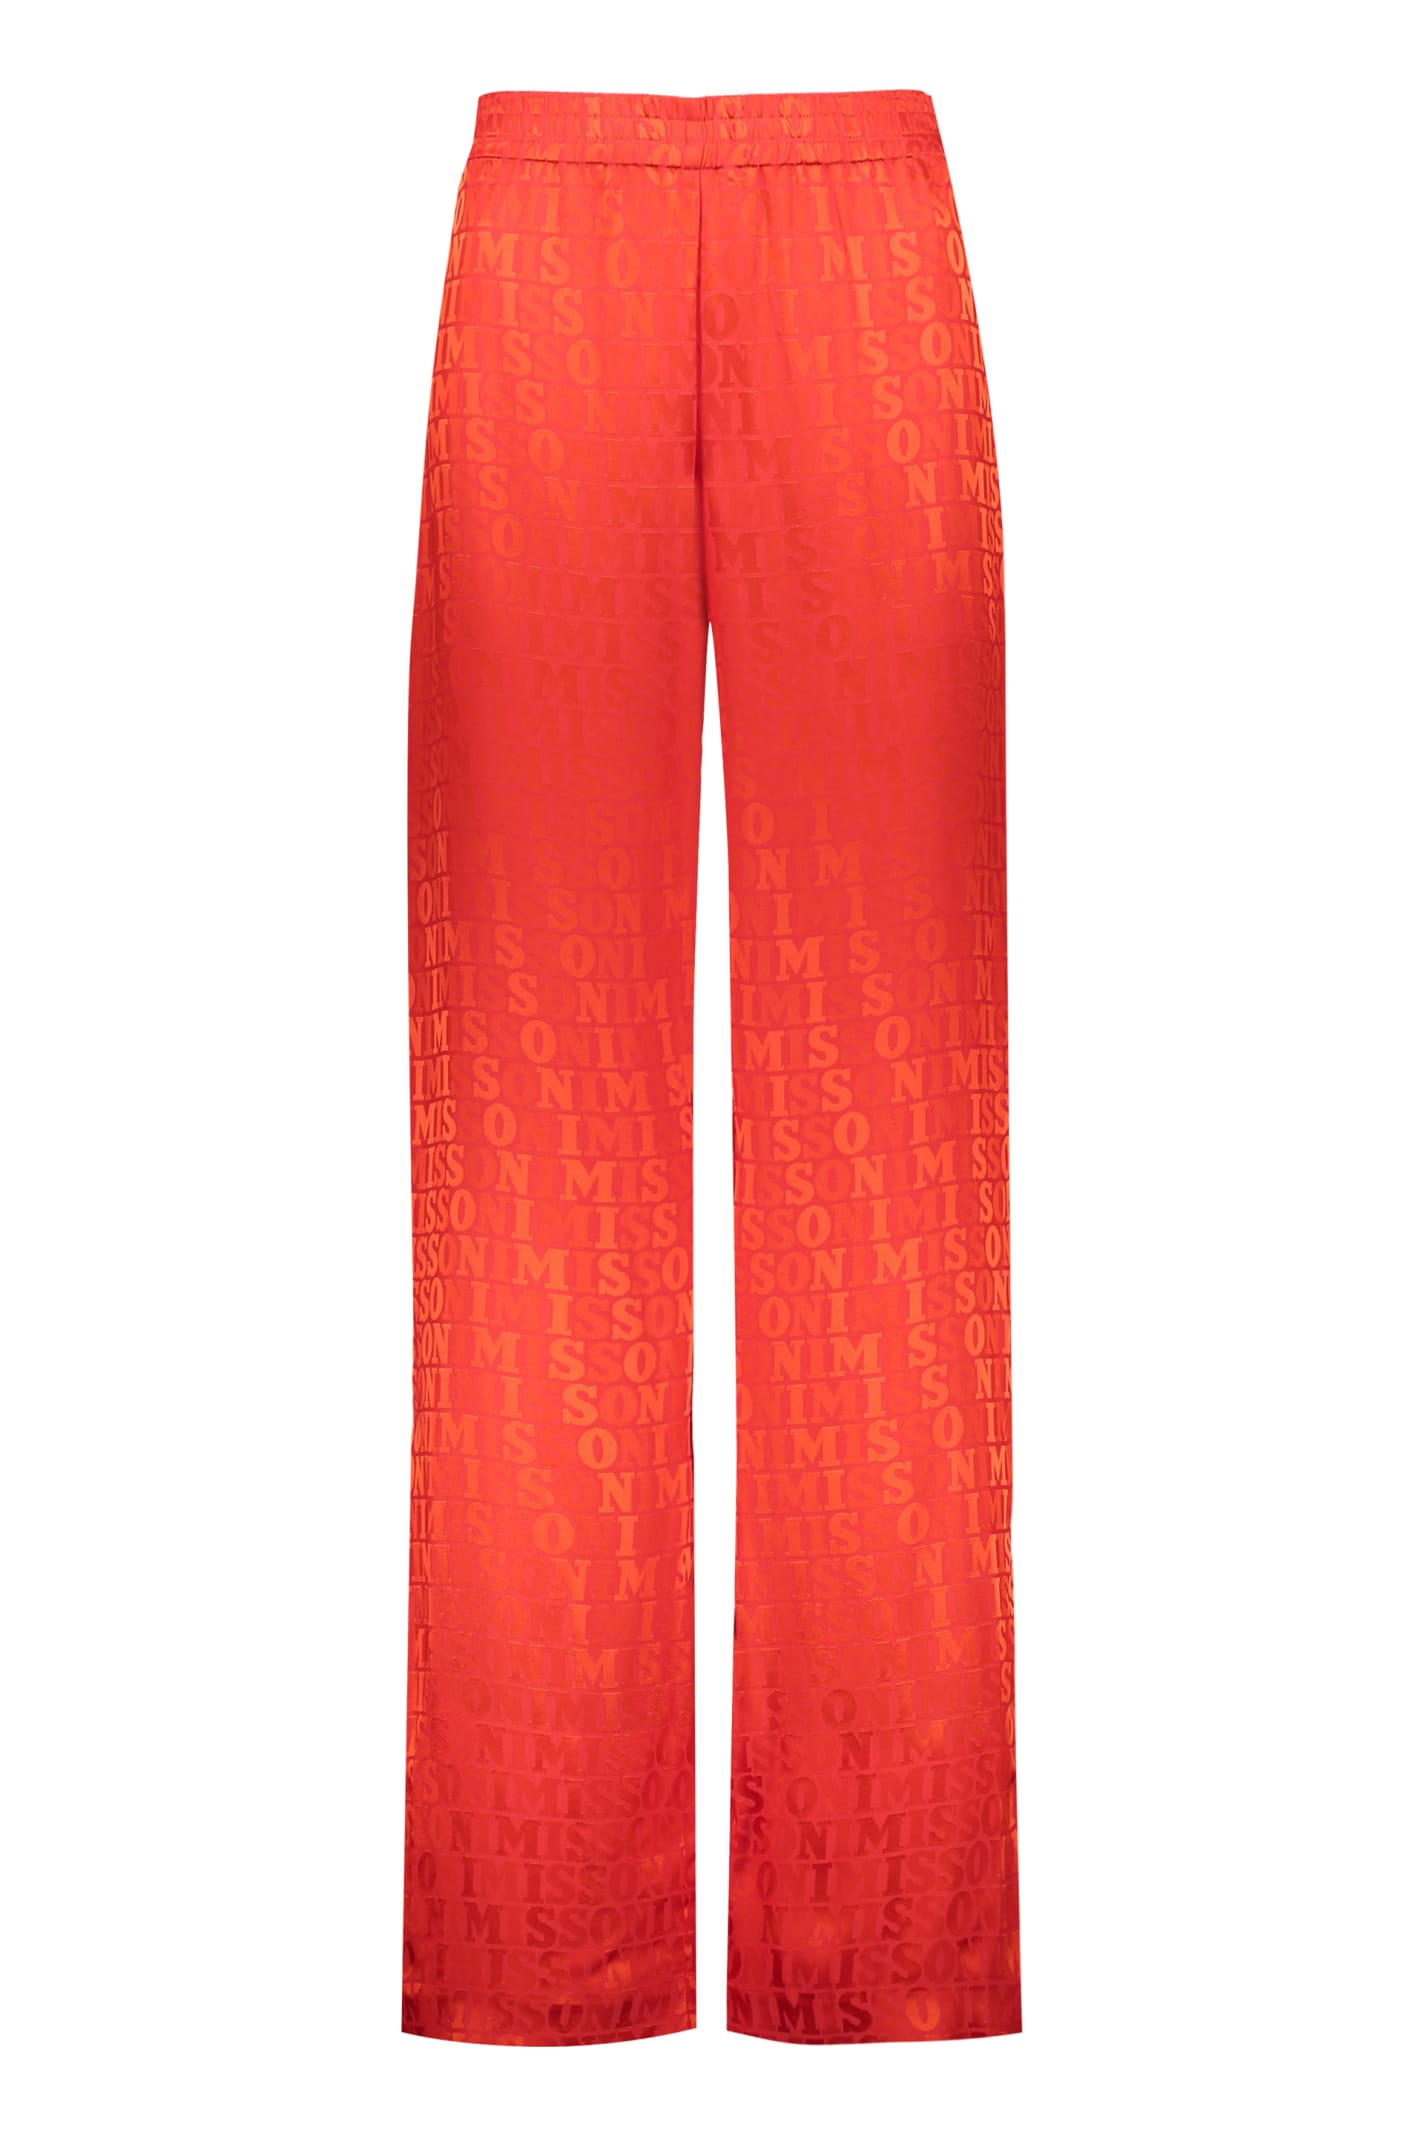 Missoni Wide Leg Trousers In Red